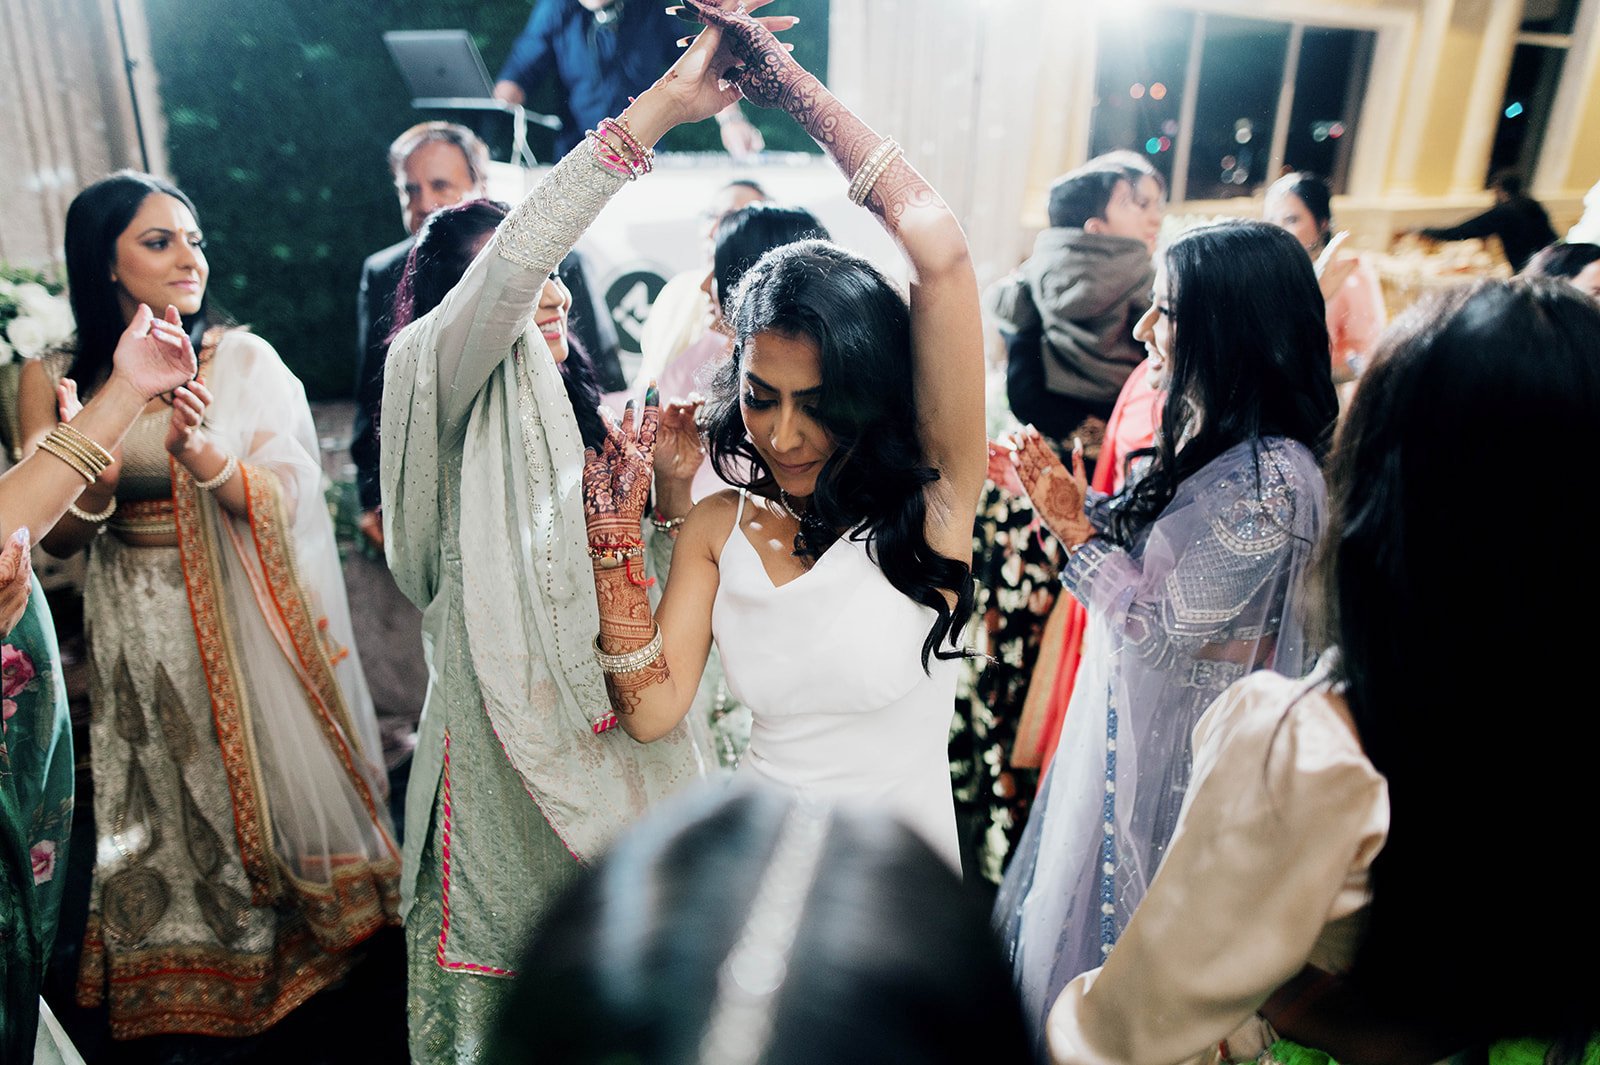 A fun, bumping dancing party at an indian wedding reception in Vancouver BC